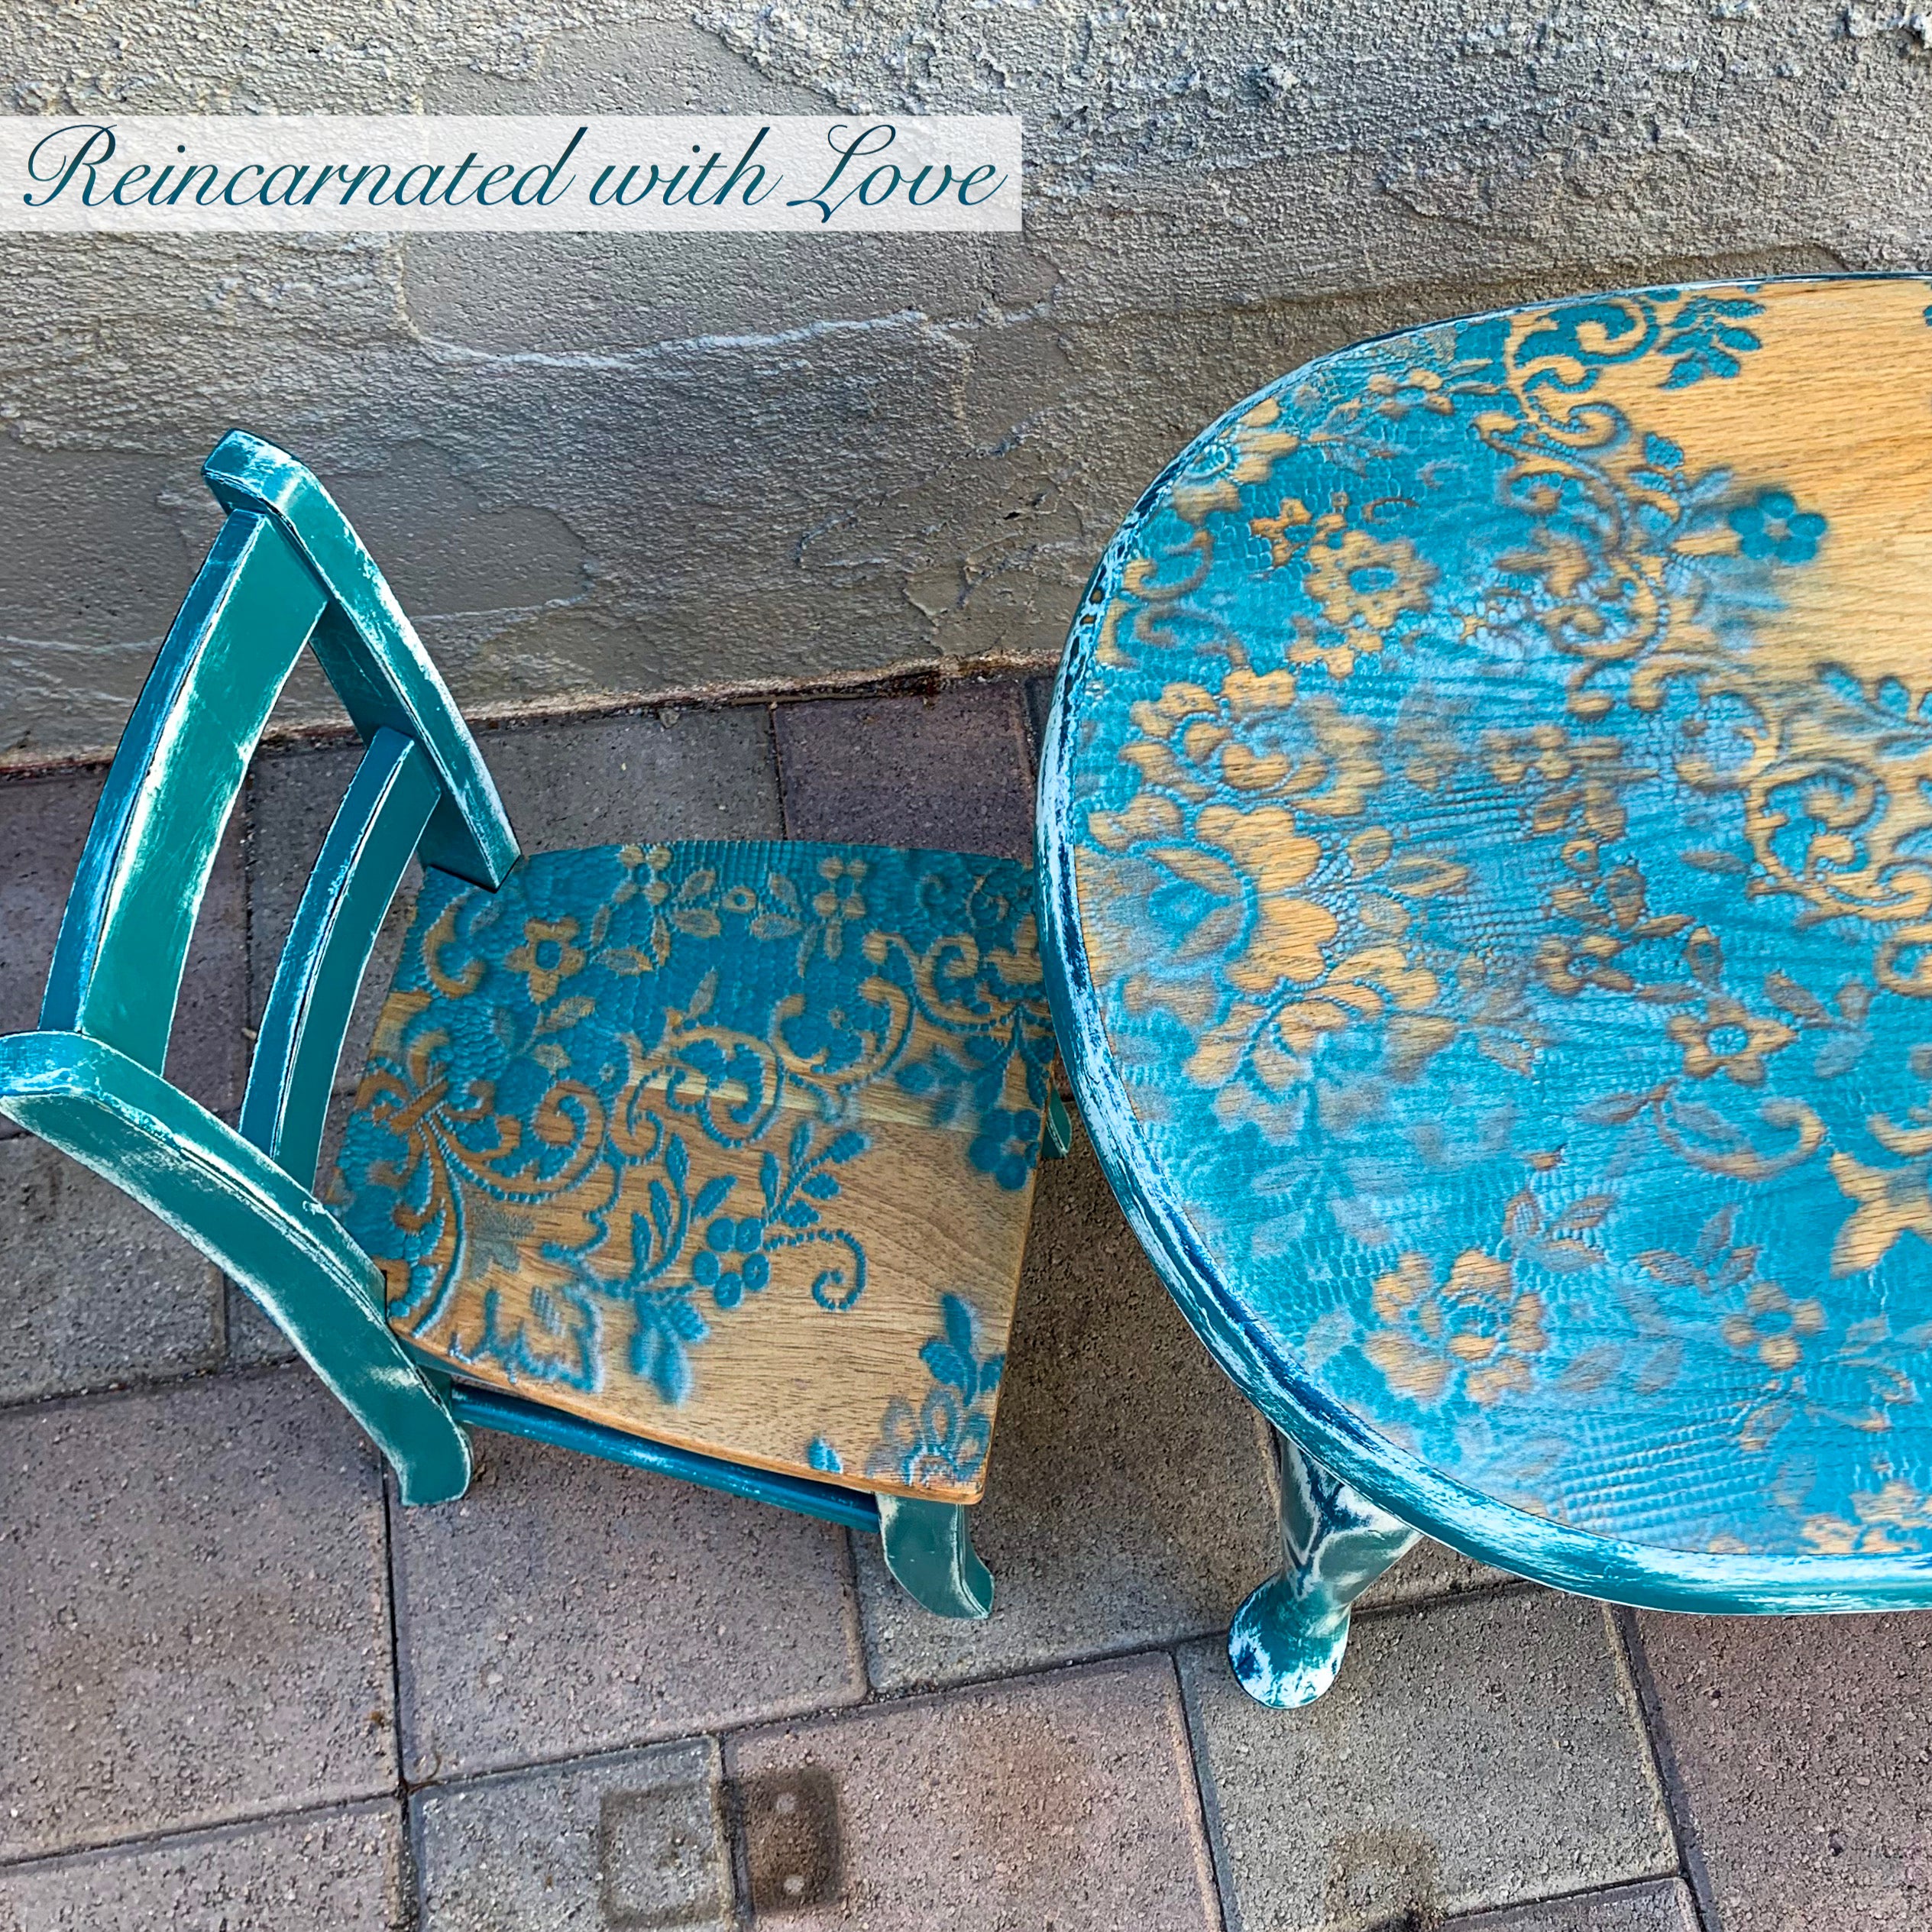 Close up shows blue, lace accents done on the chair seat & stained wood tabletop of the kid’s table.